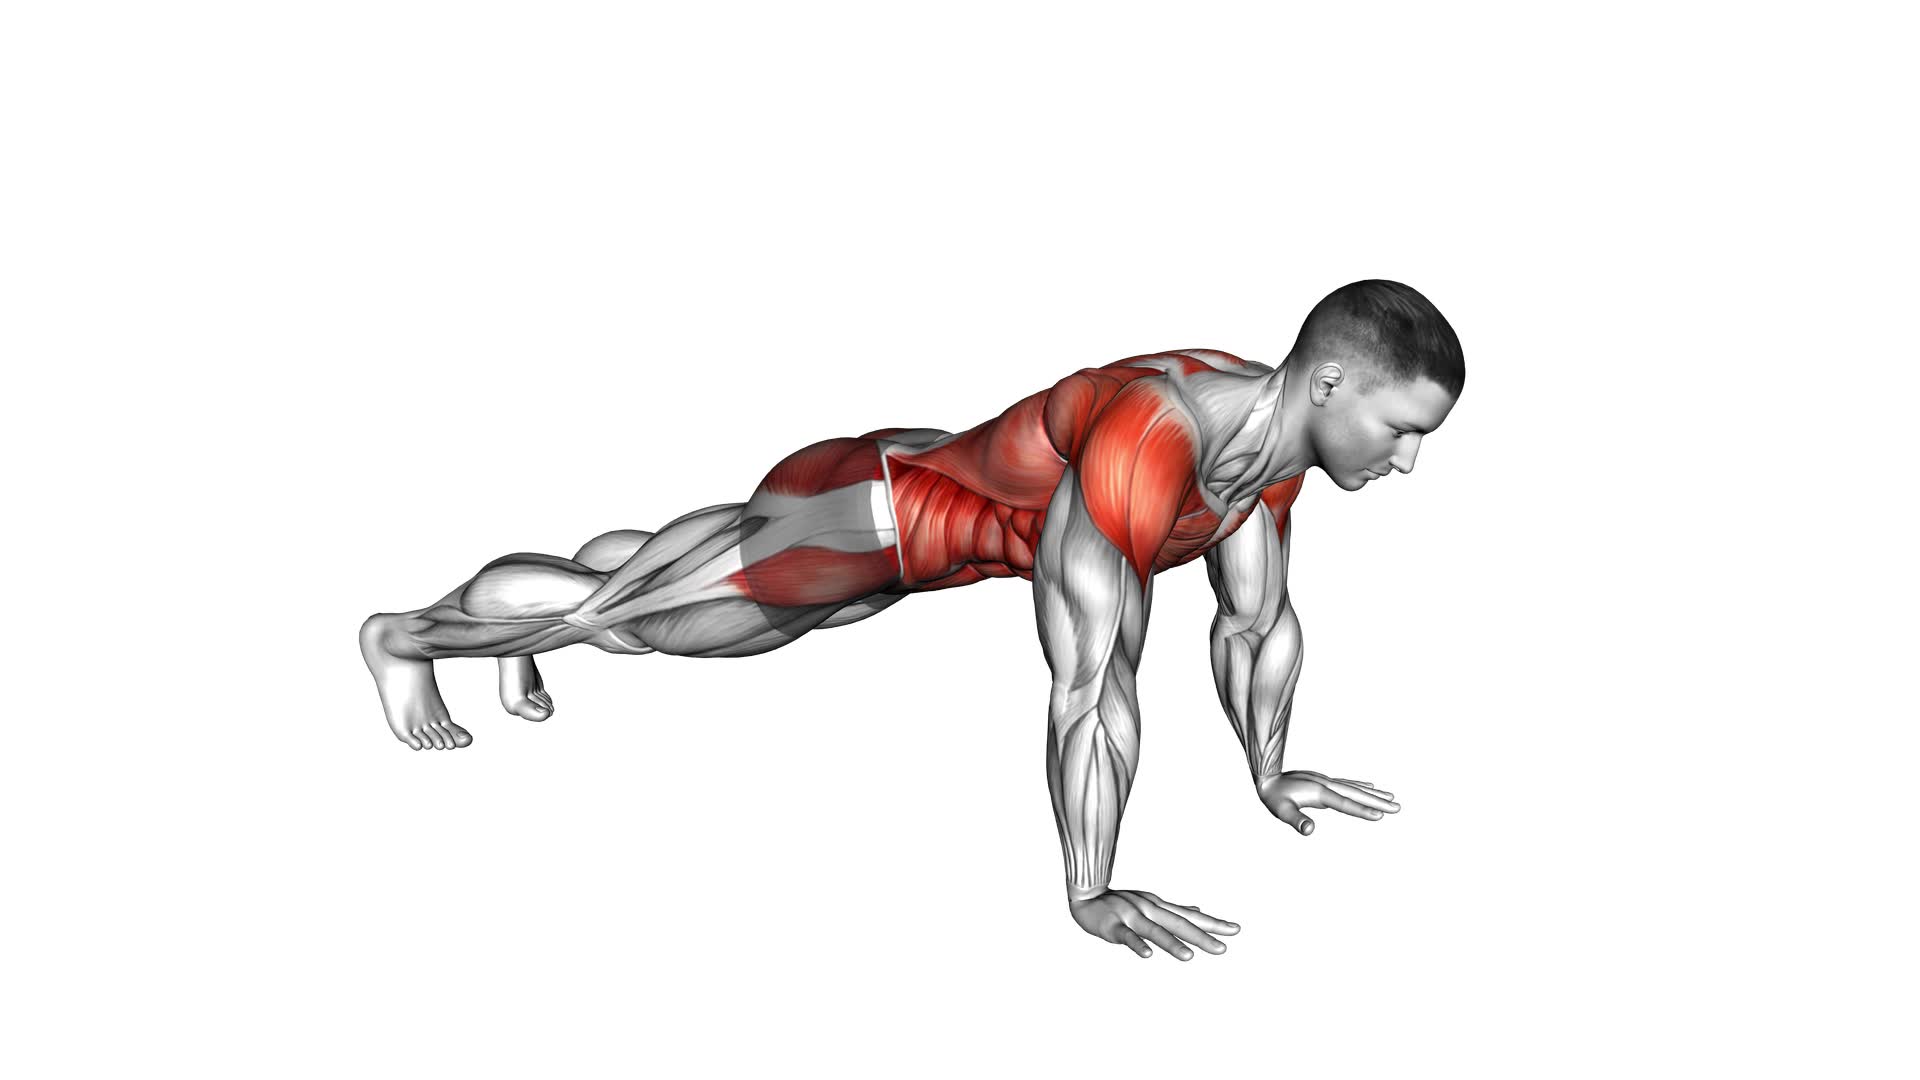 Plank Thigh Tap (male) - Video Exercise Guide & Tips